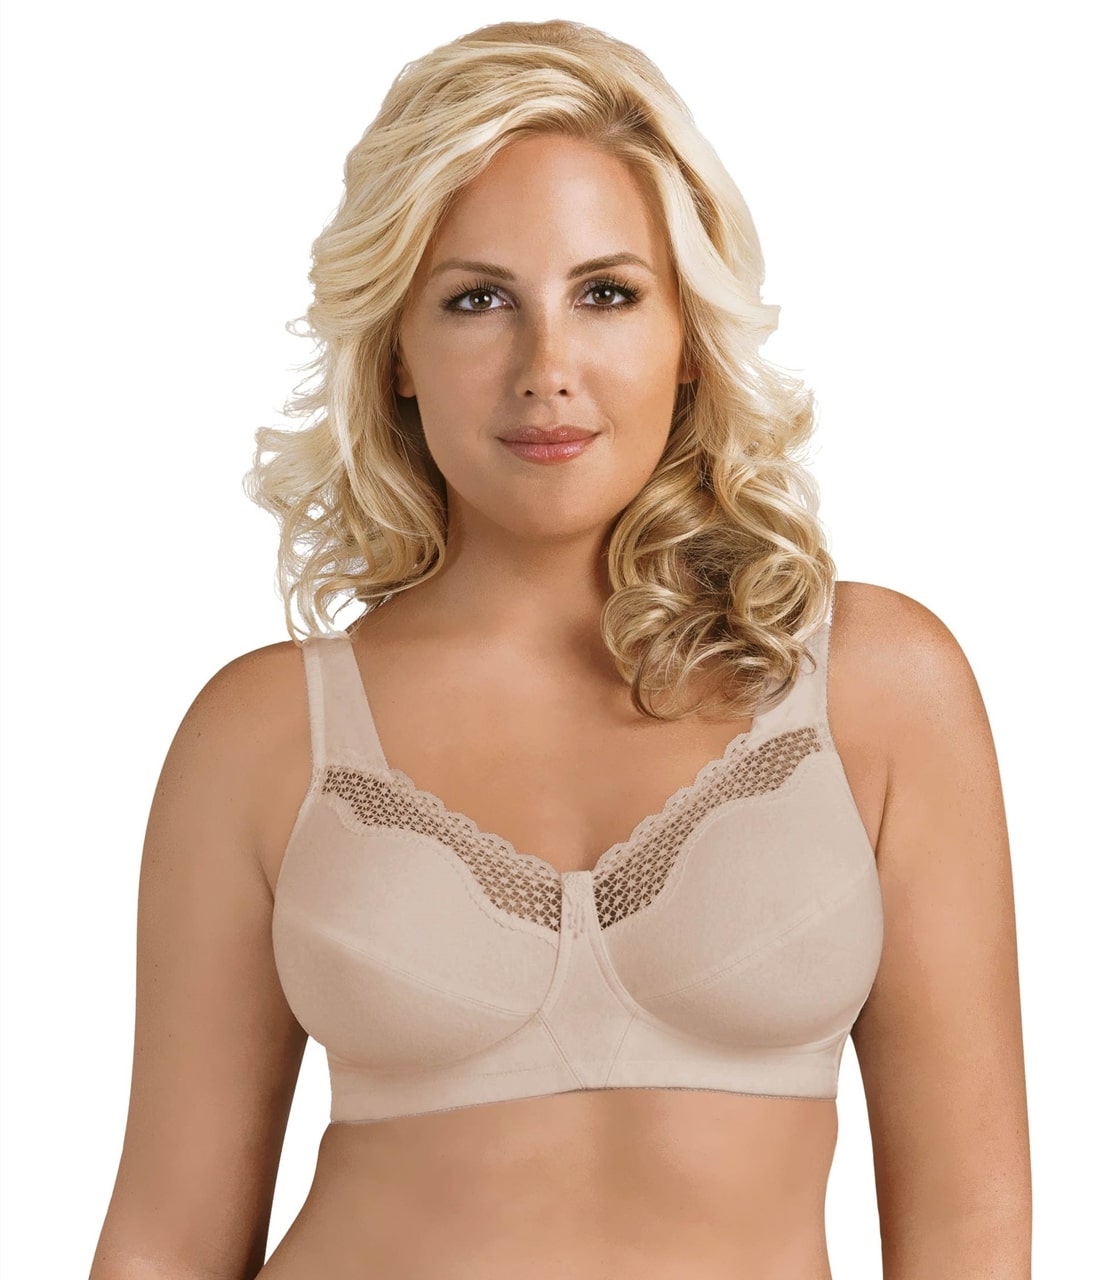 Exquisite Form #535 / #5100535 Fully Cotton No Wire Bra 